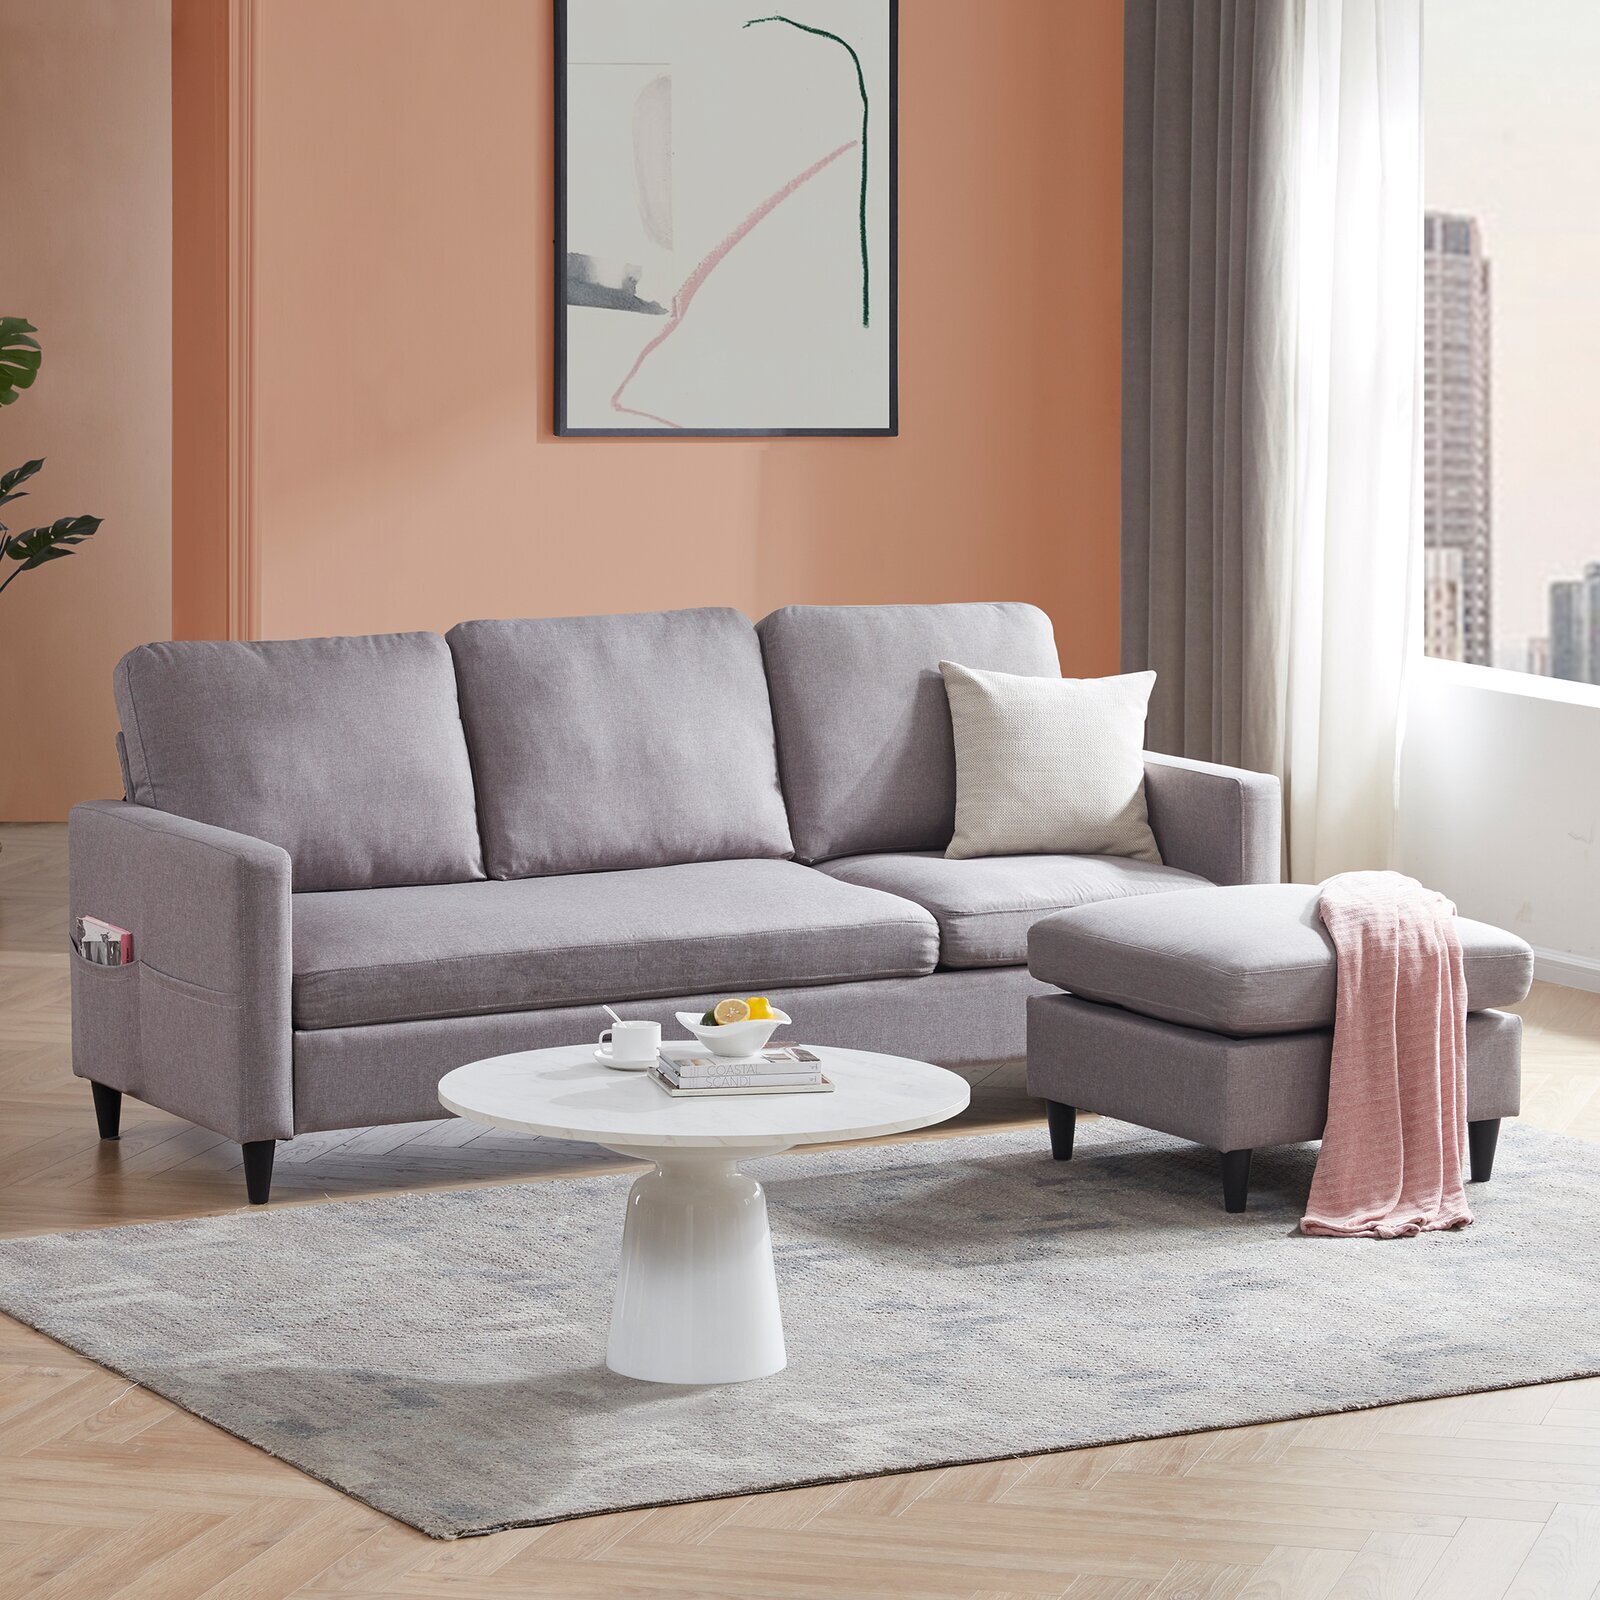 Extra small sectional sofa with generously sized ottoman